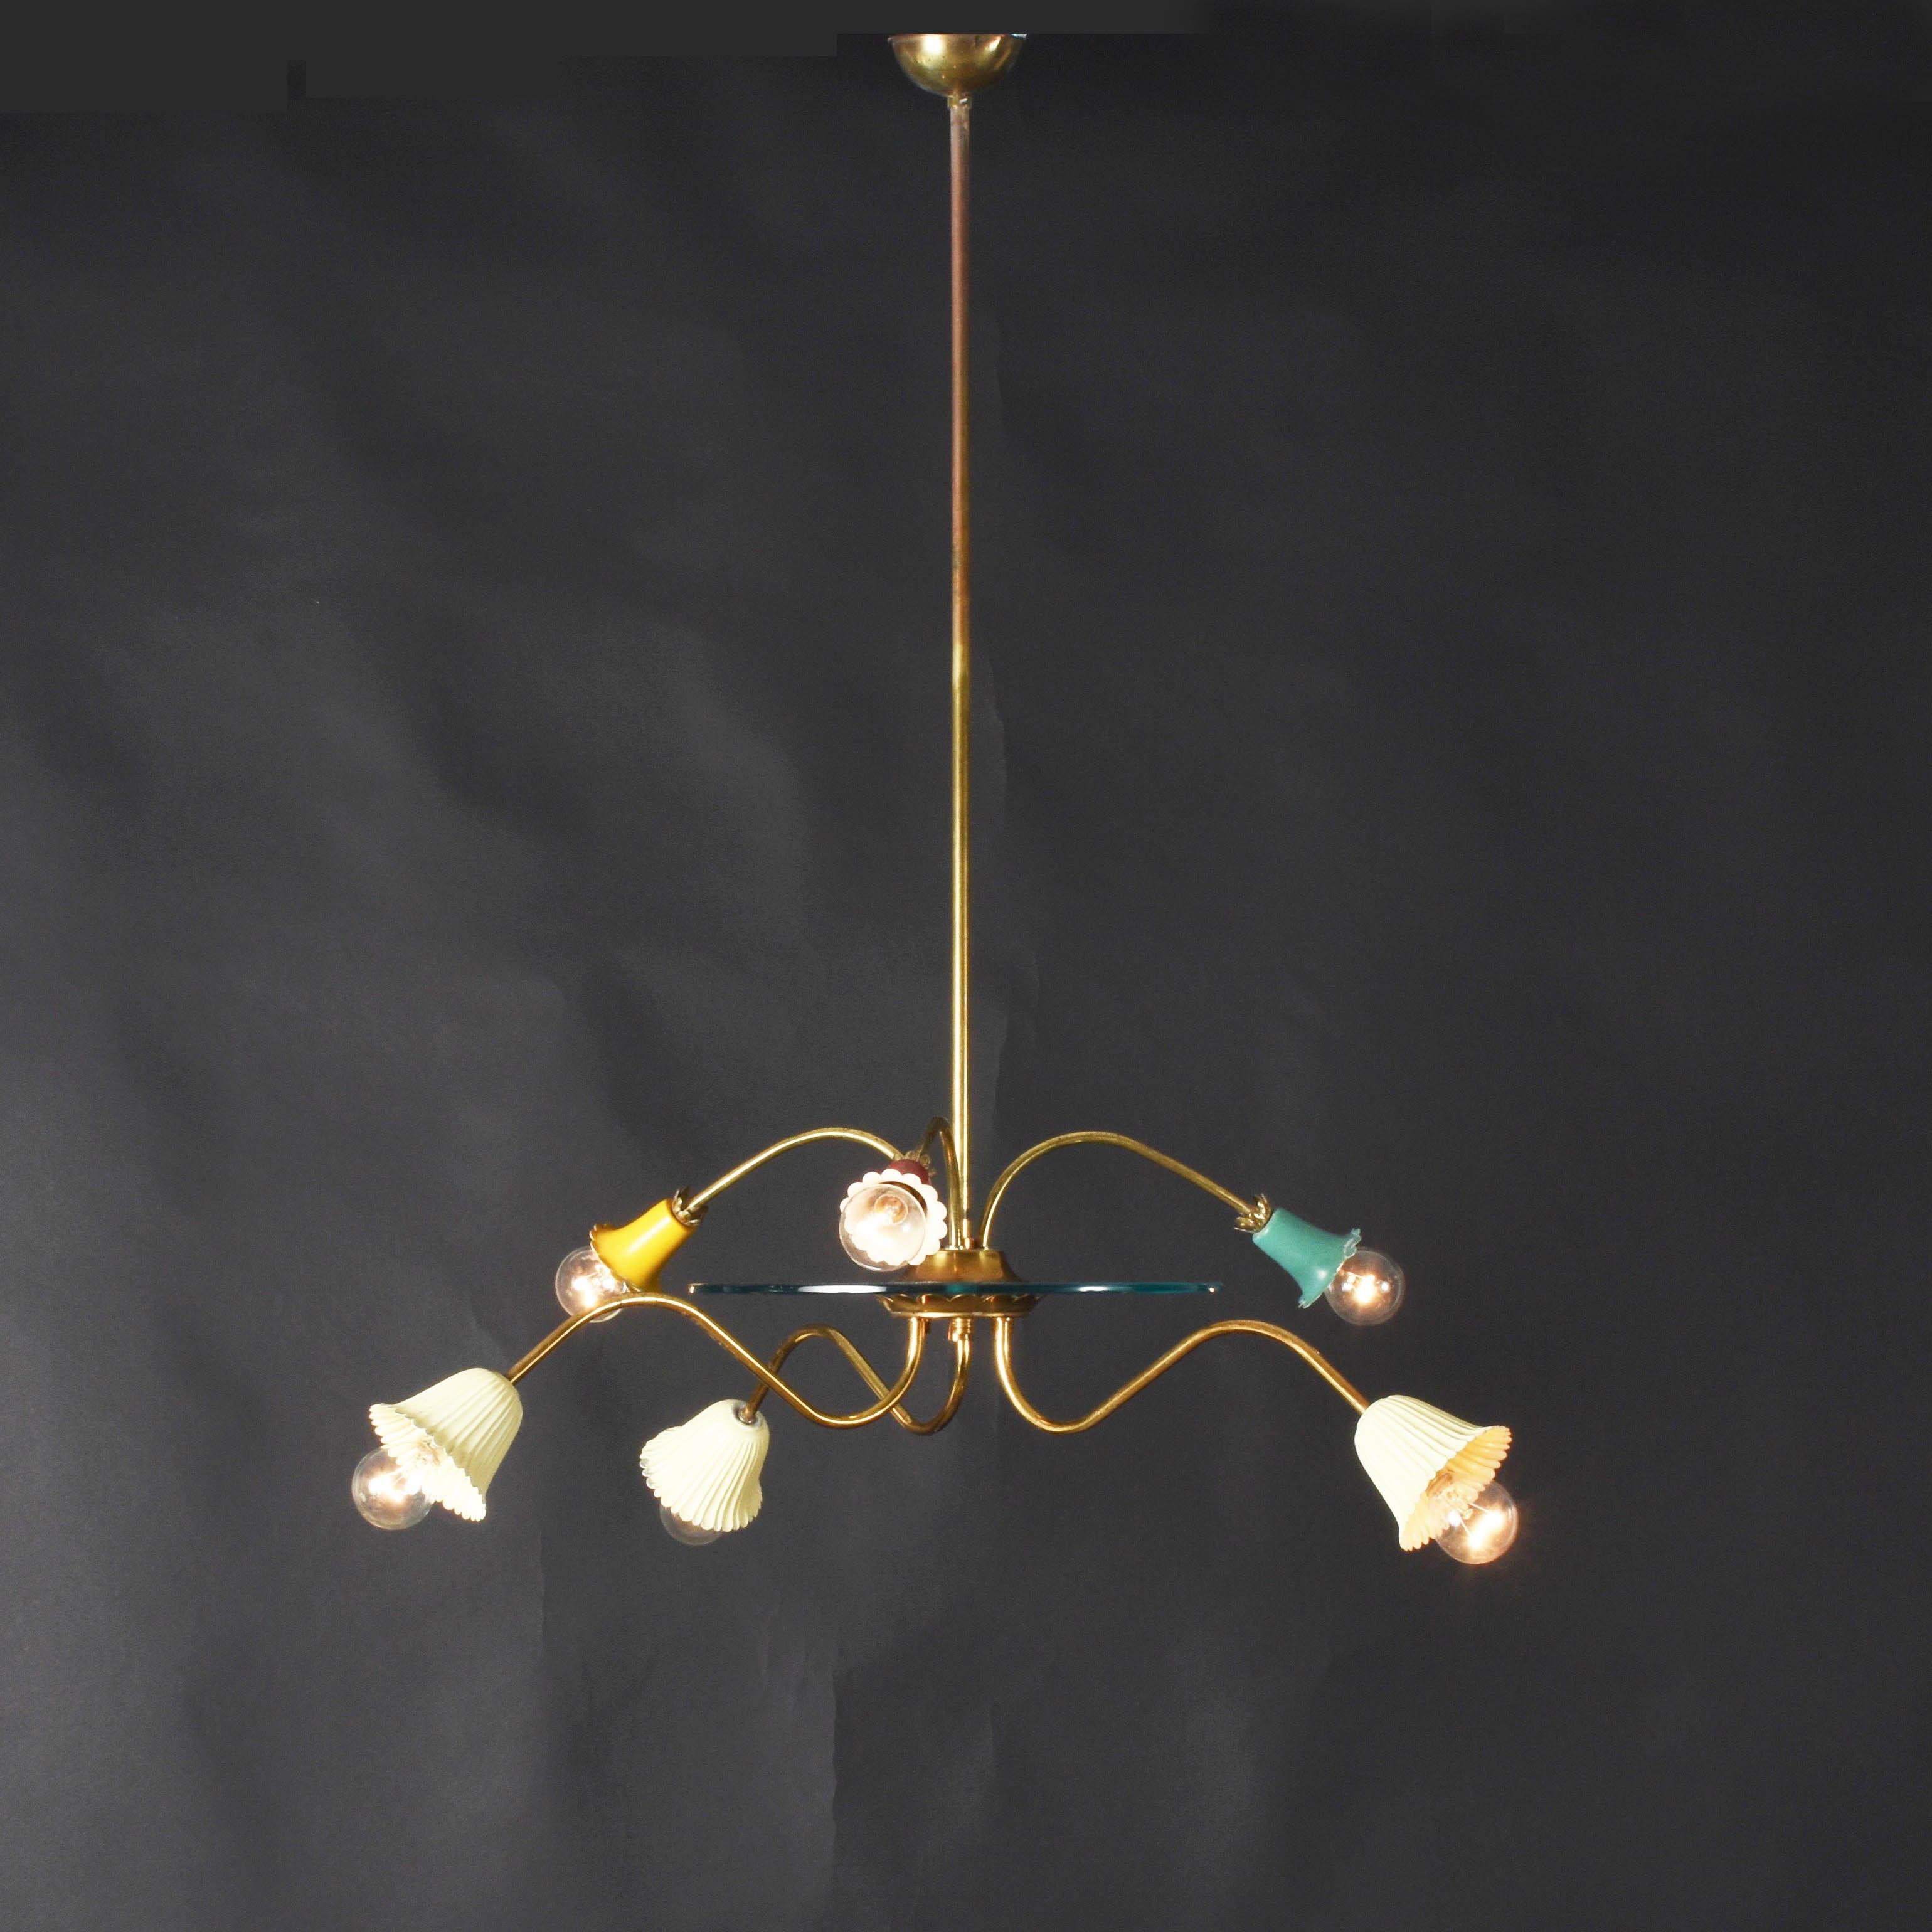 Wonderful Italian chandelier, produced during the 1950s attributed to Arredoluce.

Multicolored bell shades in Italian enameled brass with six lights. A glass base is separating the first floor of bulbs from the second one.

A great and